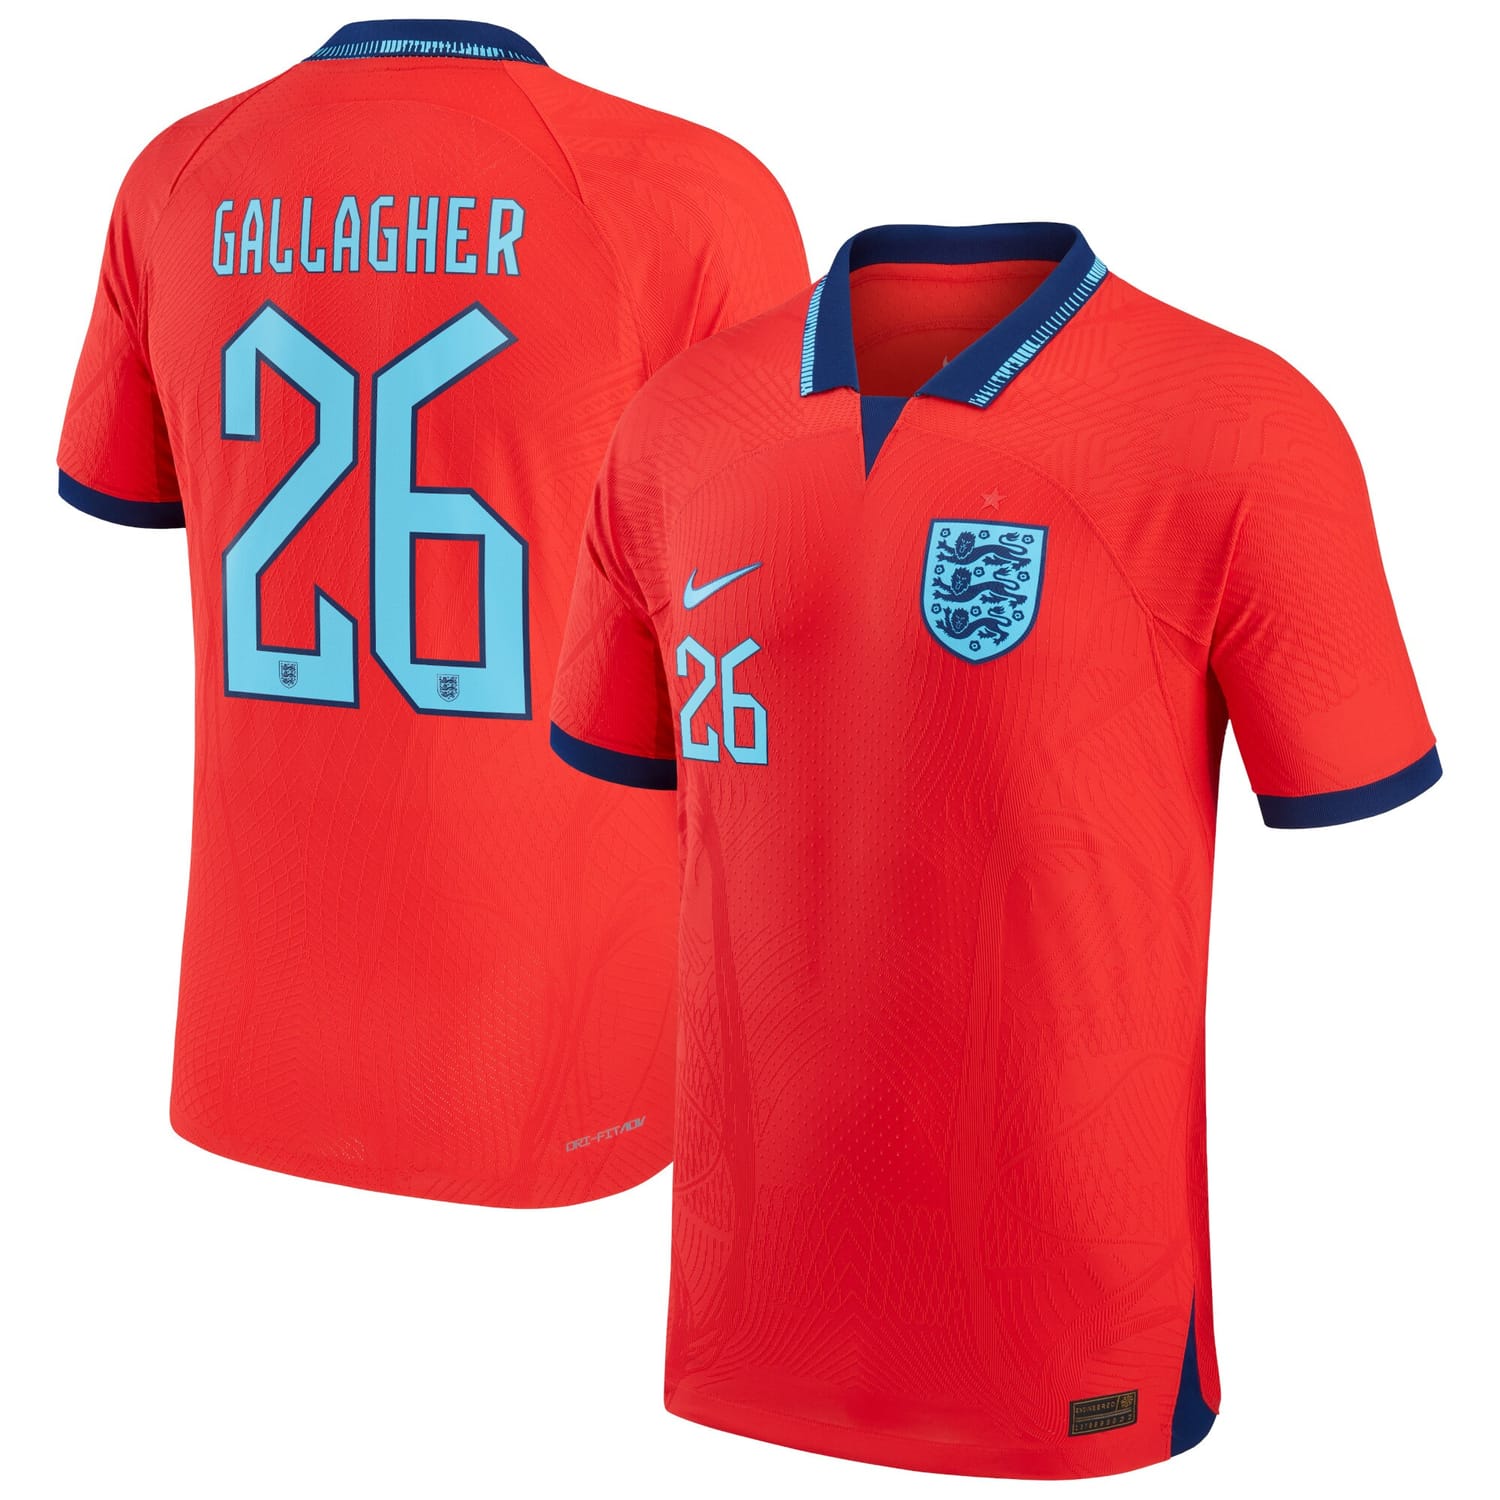 England National Team Away Authentic Jersey Shirt 2022 player Conor Gallagher 26 printing for Men